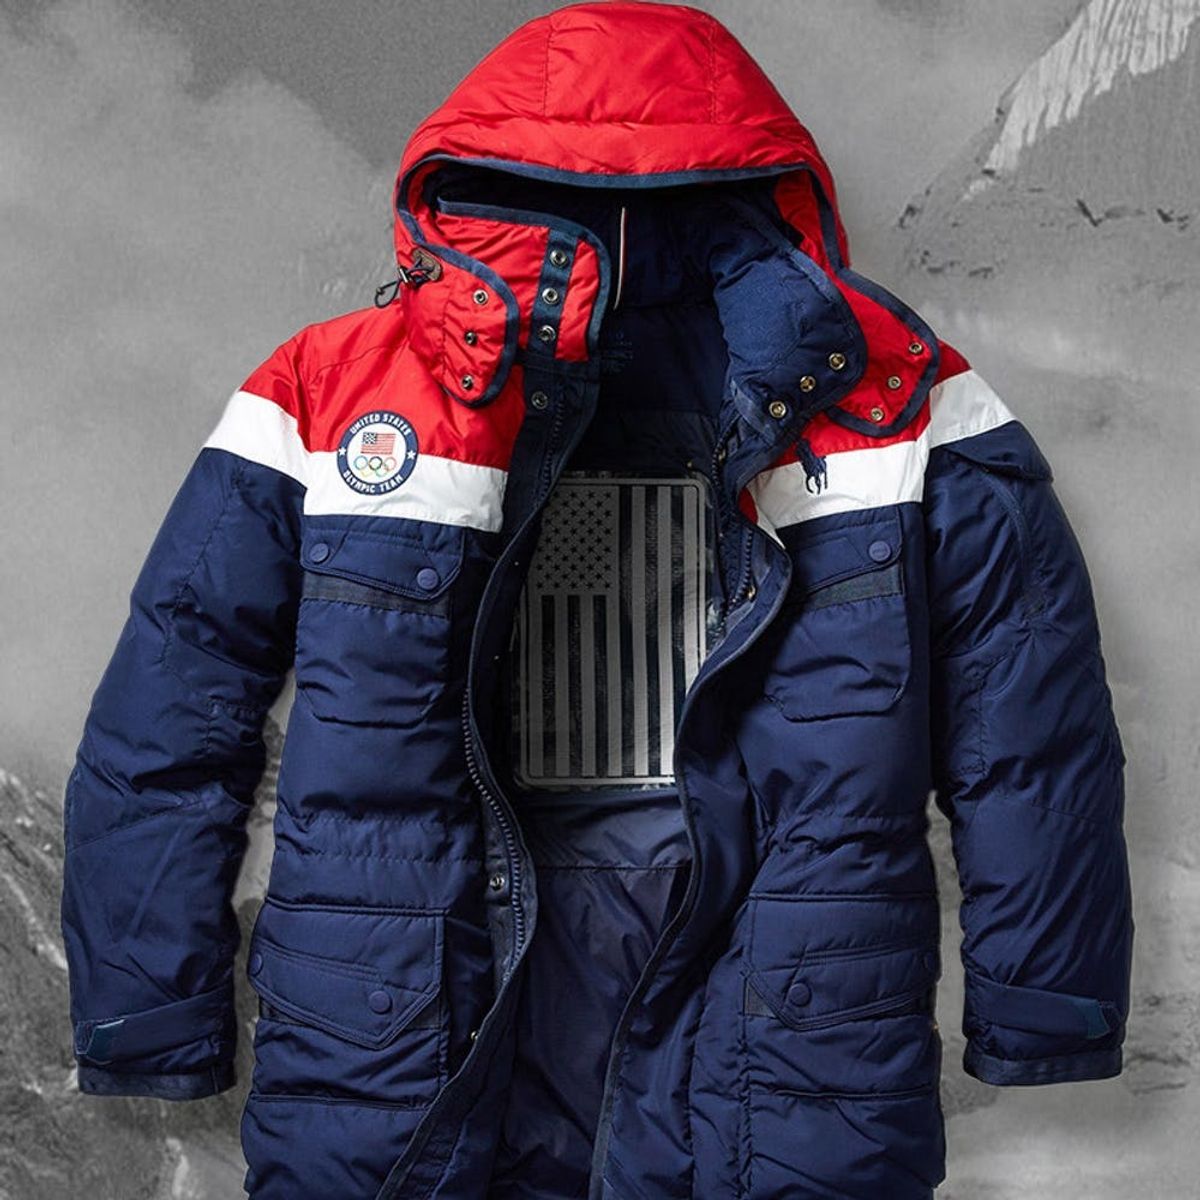 Team USA Will Wear *Heated* Ralph Lauren Jackets at the 2018 Winter Olympics Opening Ceremony